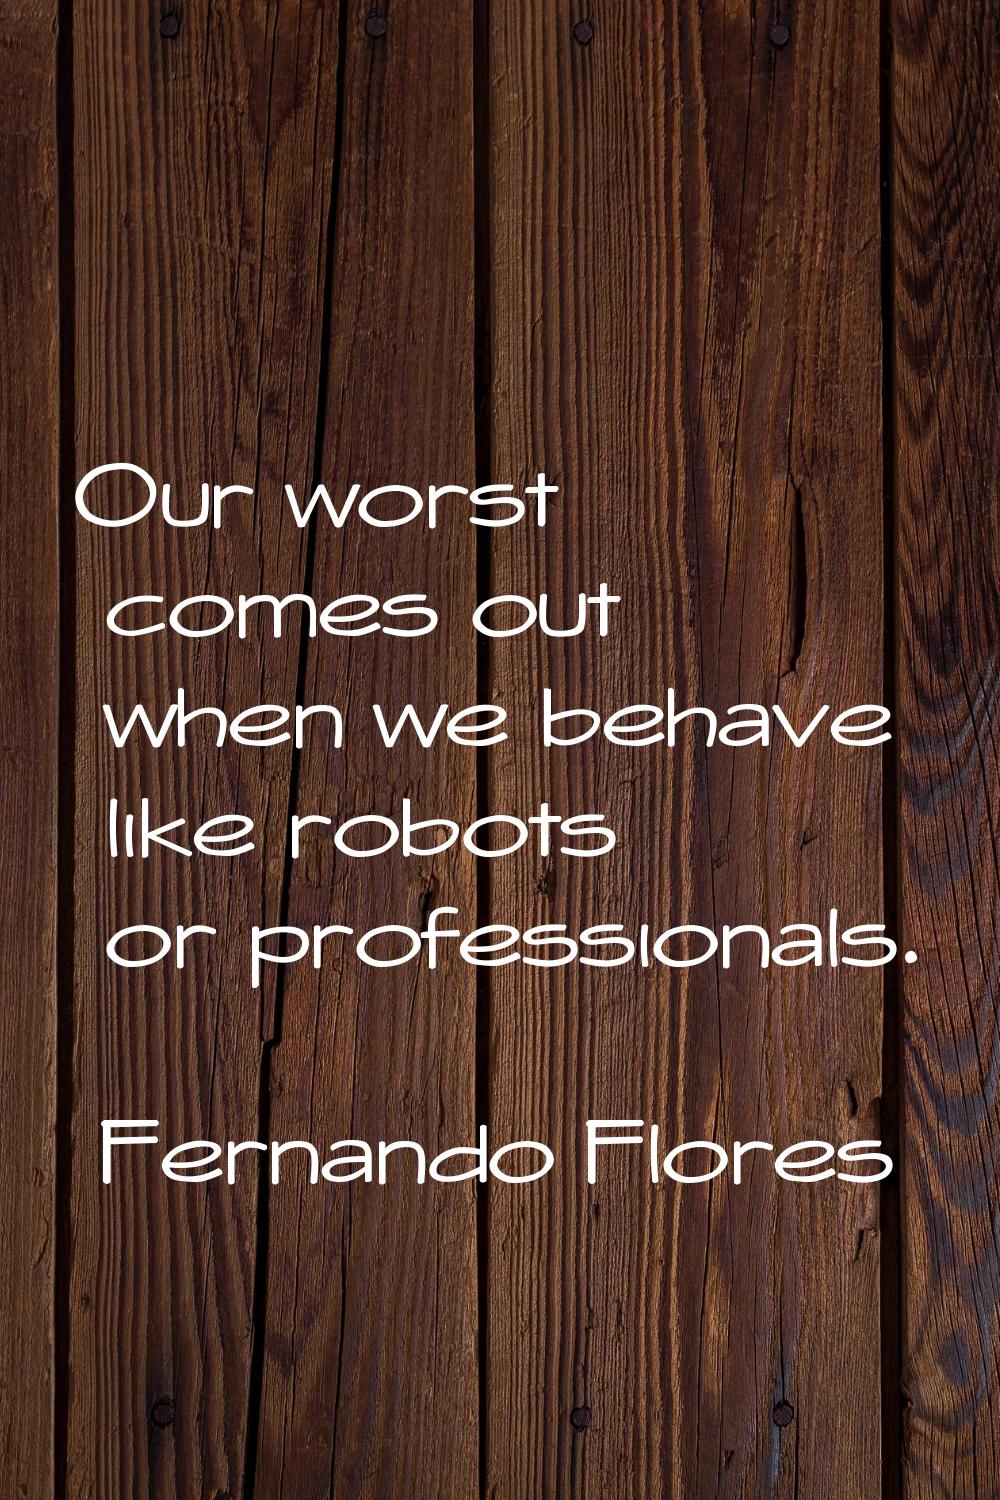 Our worst comes out when we behave like robots or professionals.